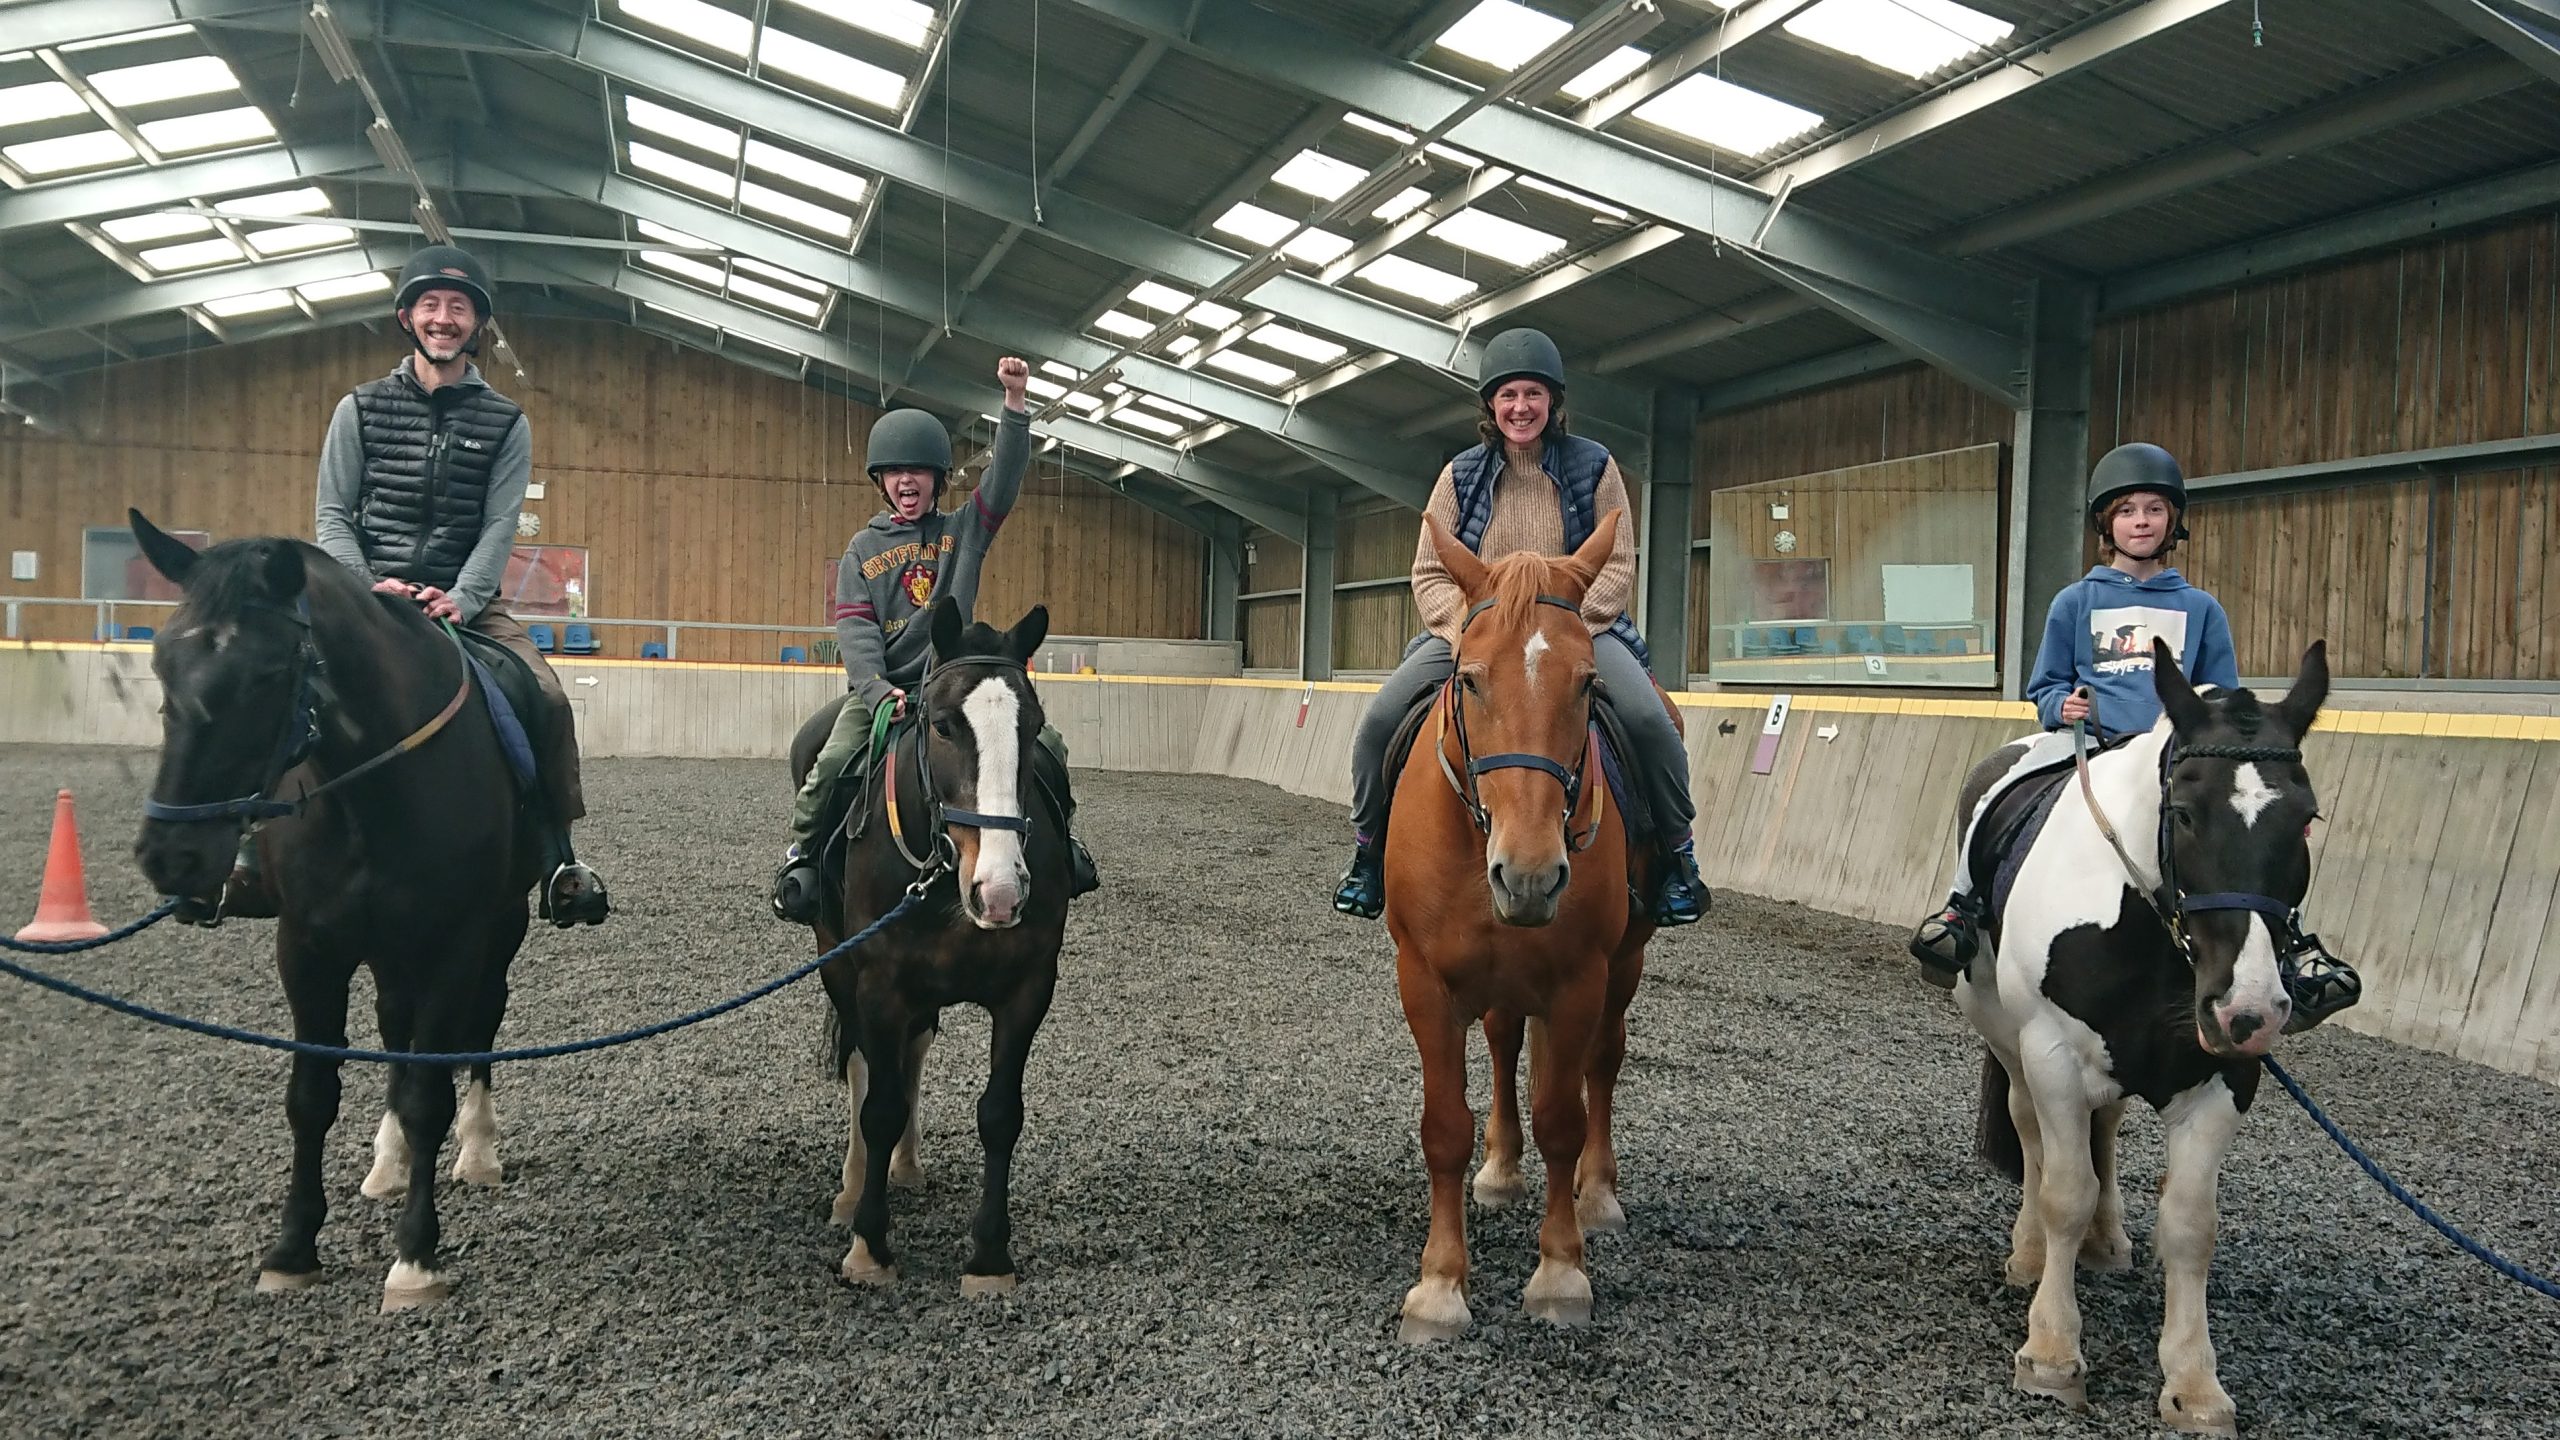 Four people sit on top of a horse each in a line facing the camera. They are all wearing riding hats and smiling in an indoor arena building.